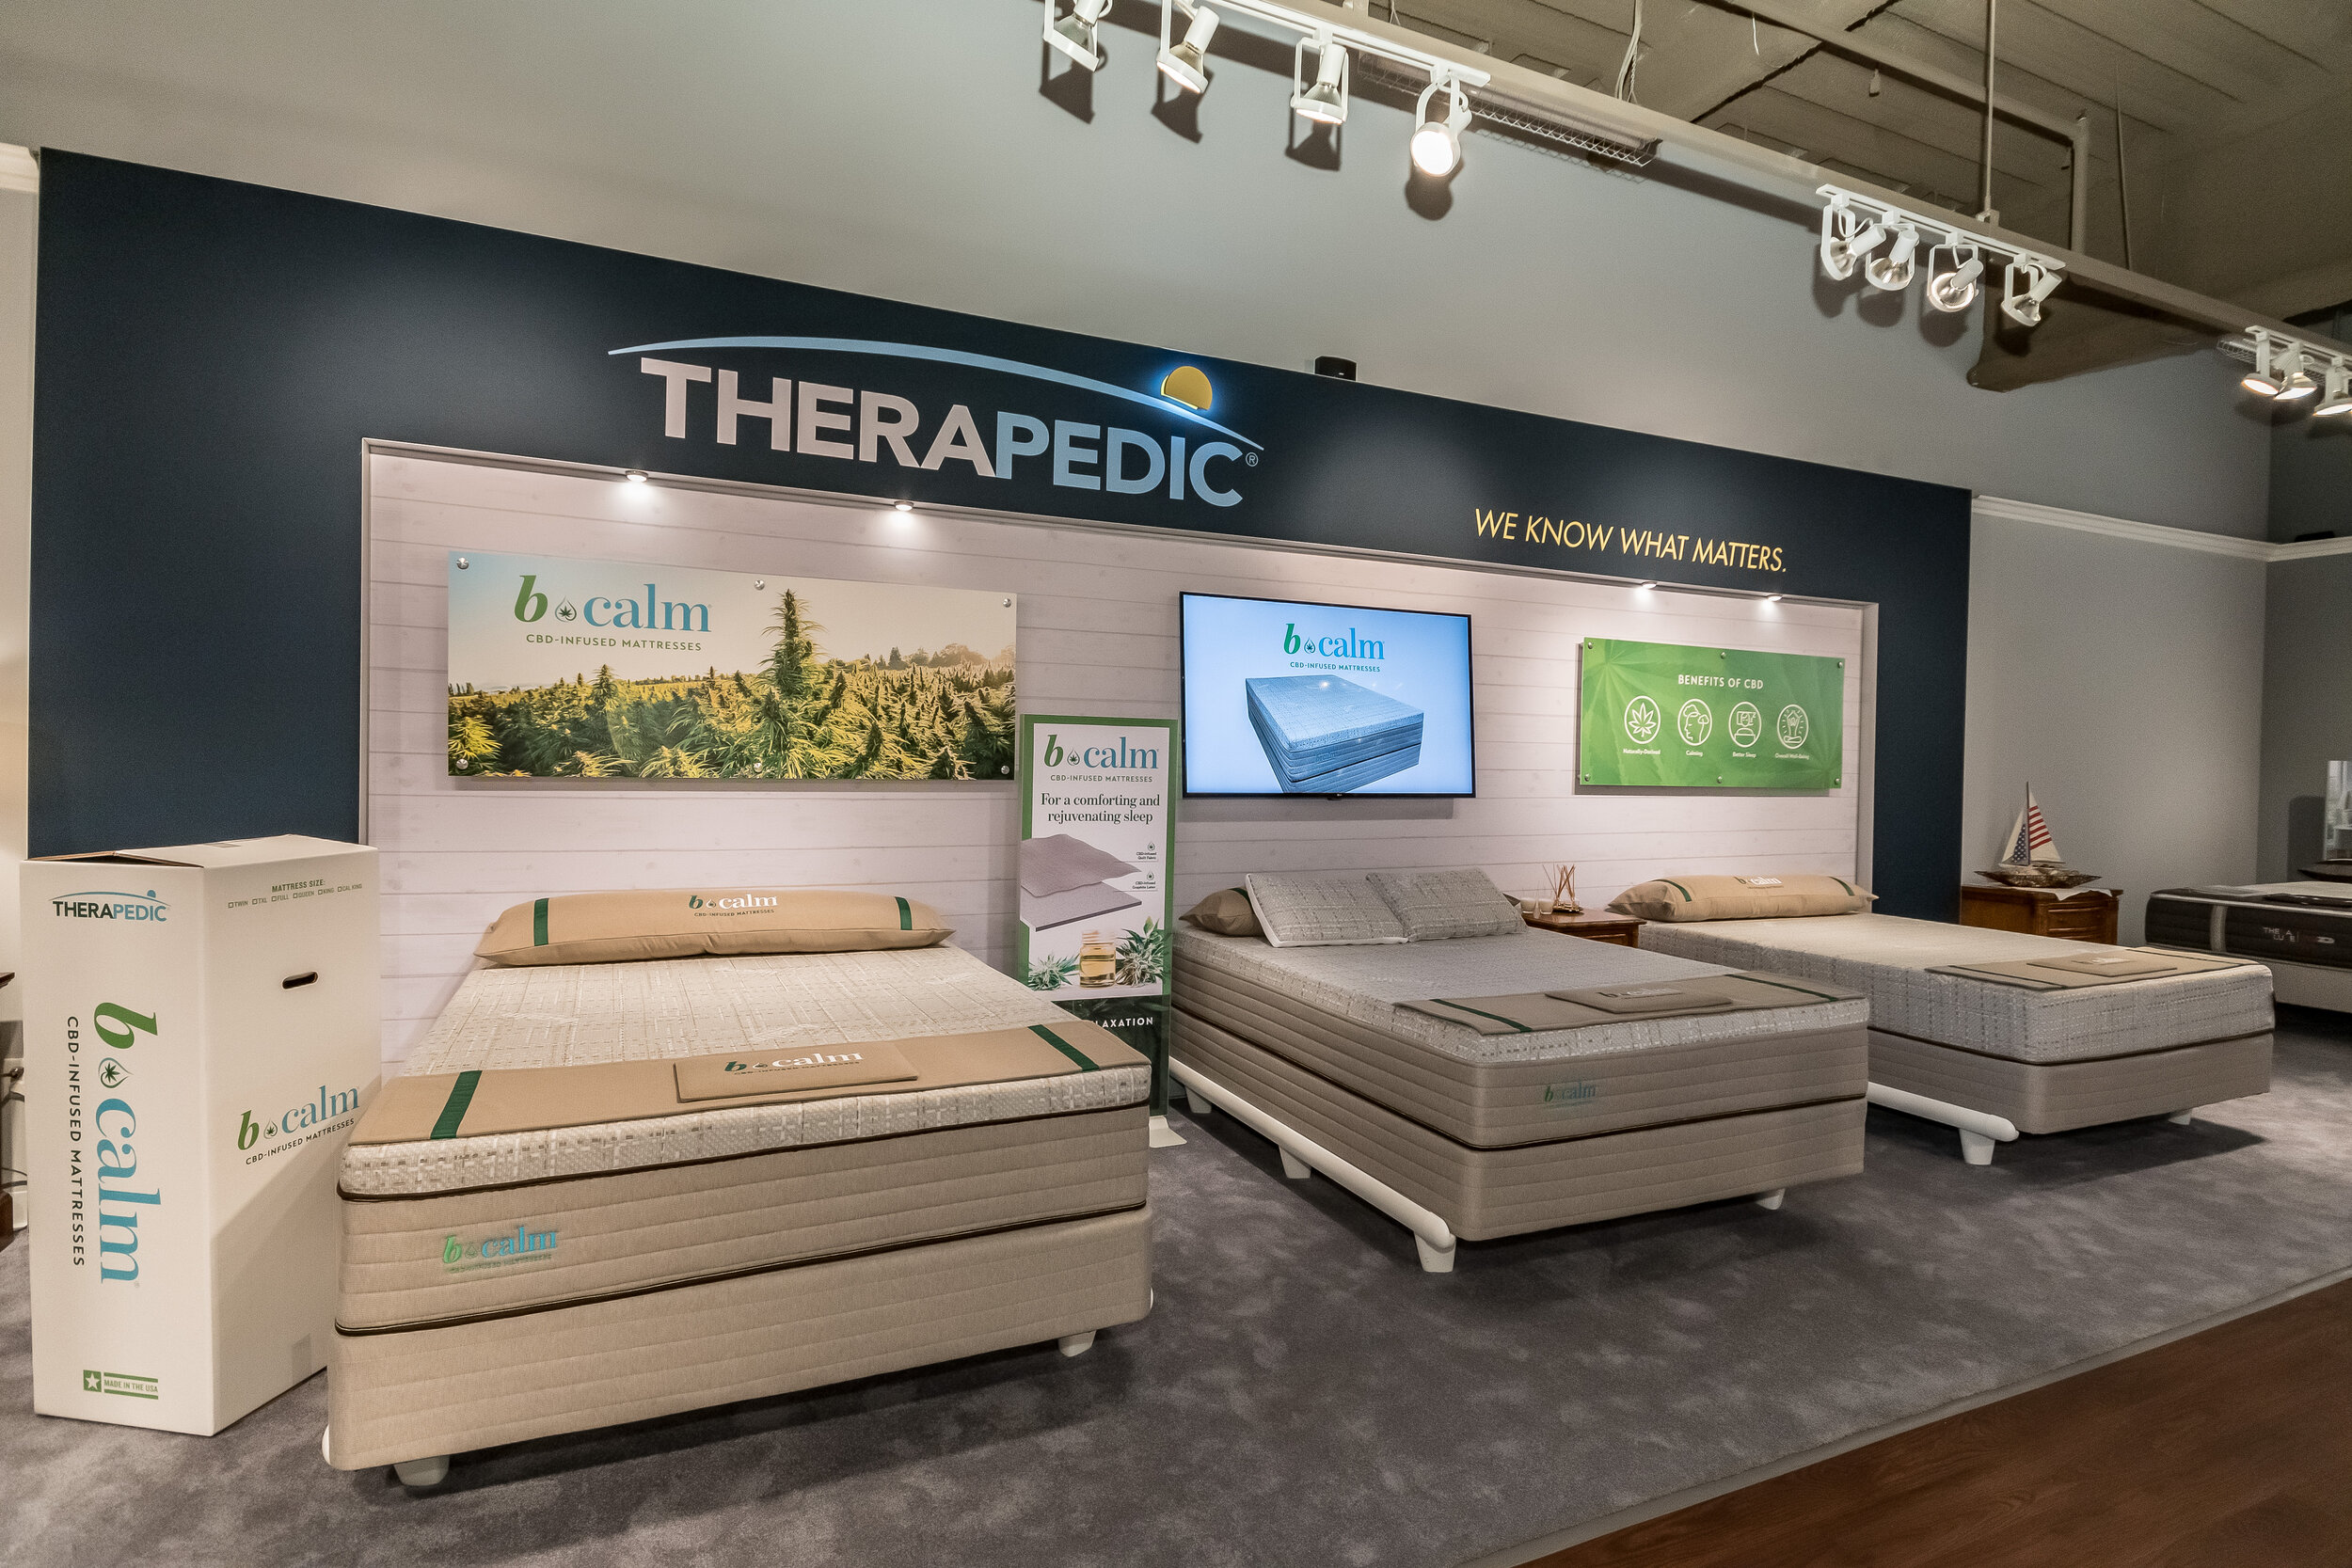 Therapedic’s b-calm line will be enhanced by additional CBD accessories for Las Vegas Market next month.